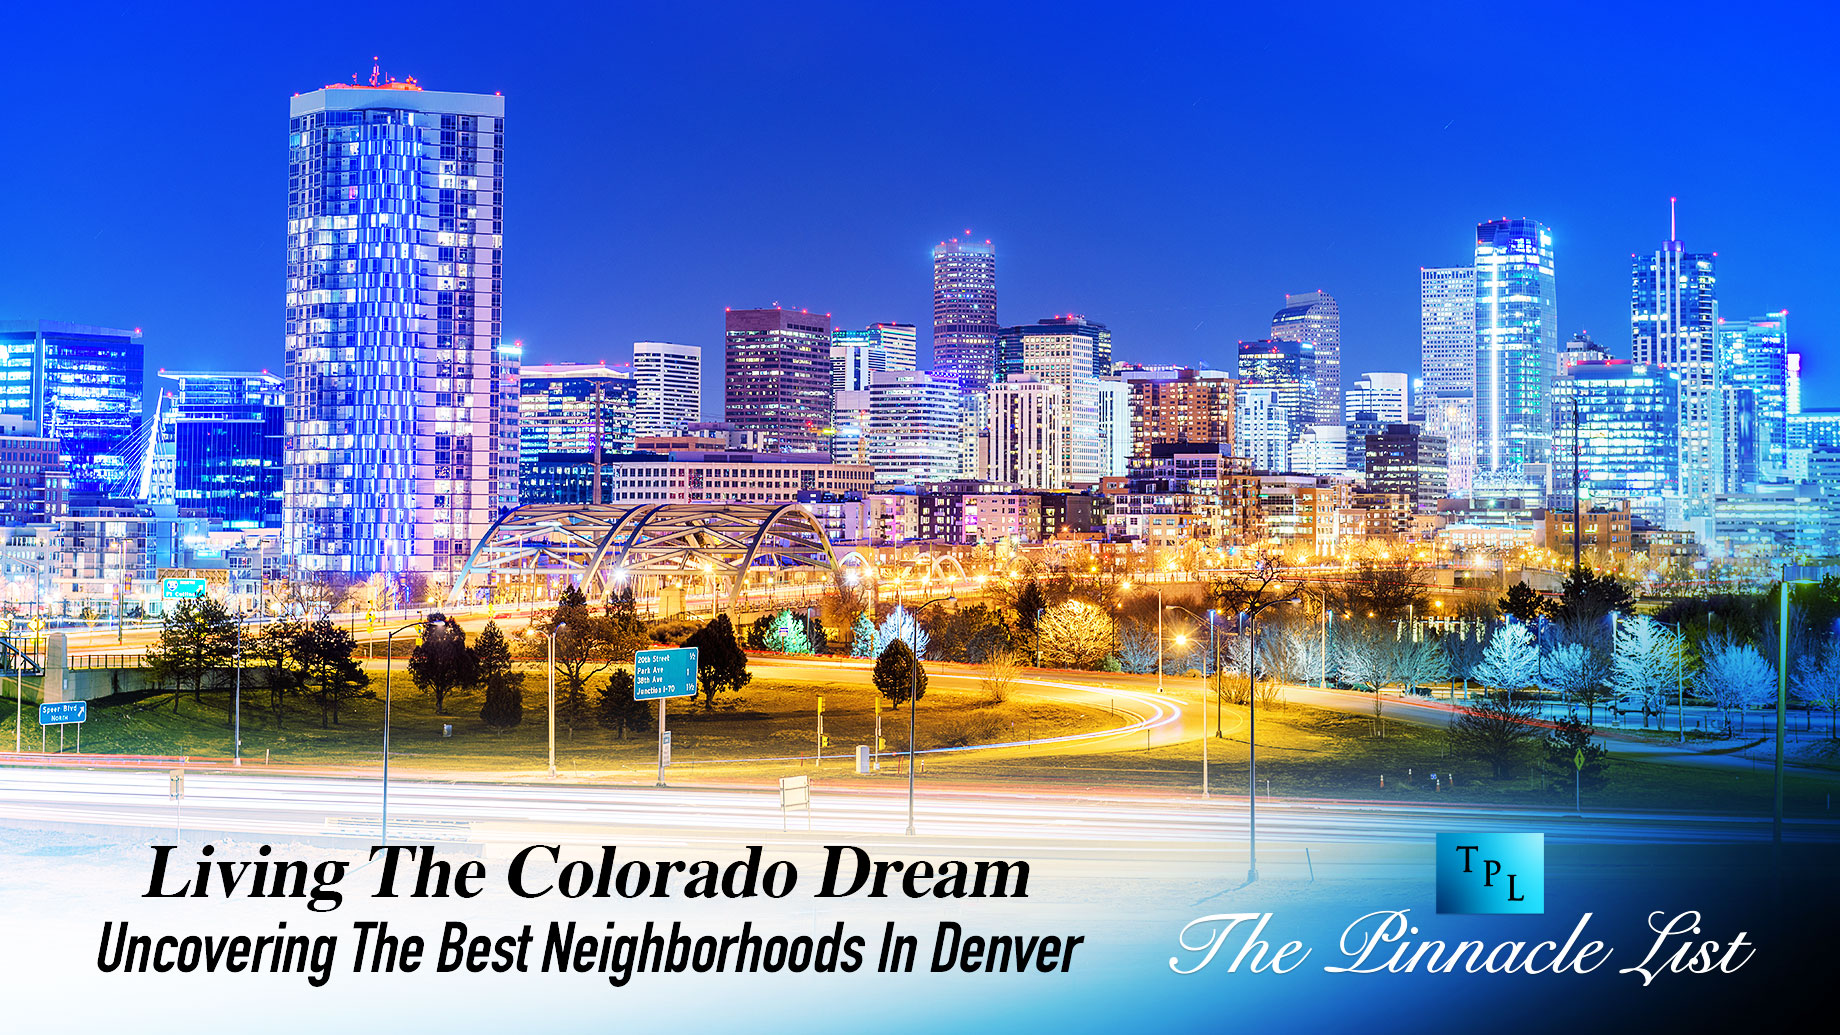 Living The Colorado Dream: Uncovering The Best Neighborhoods In Denver